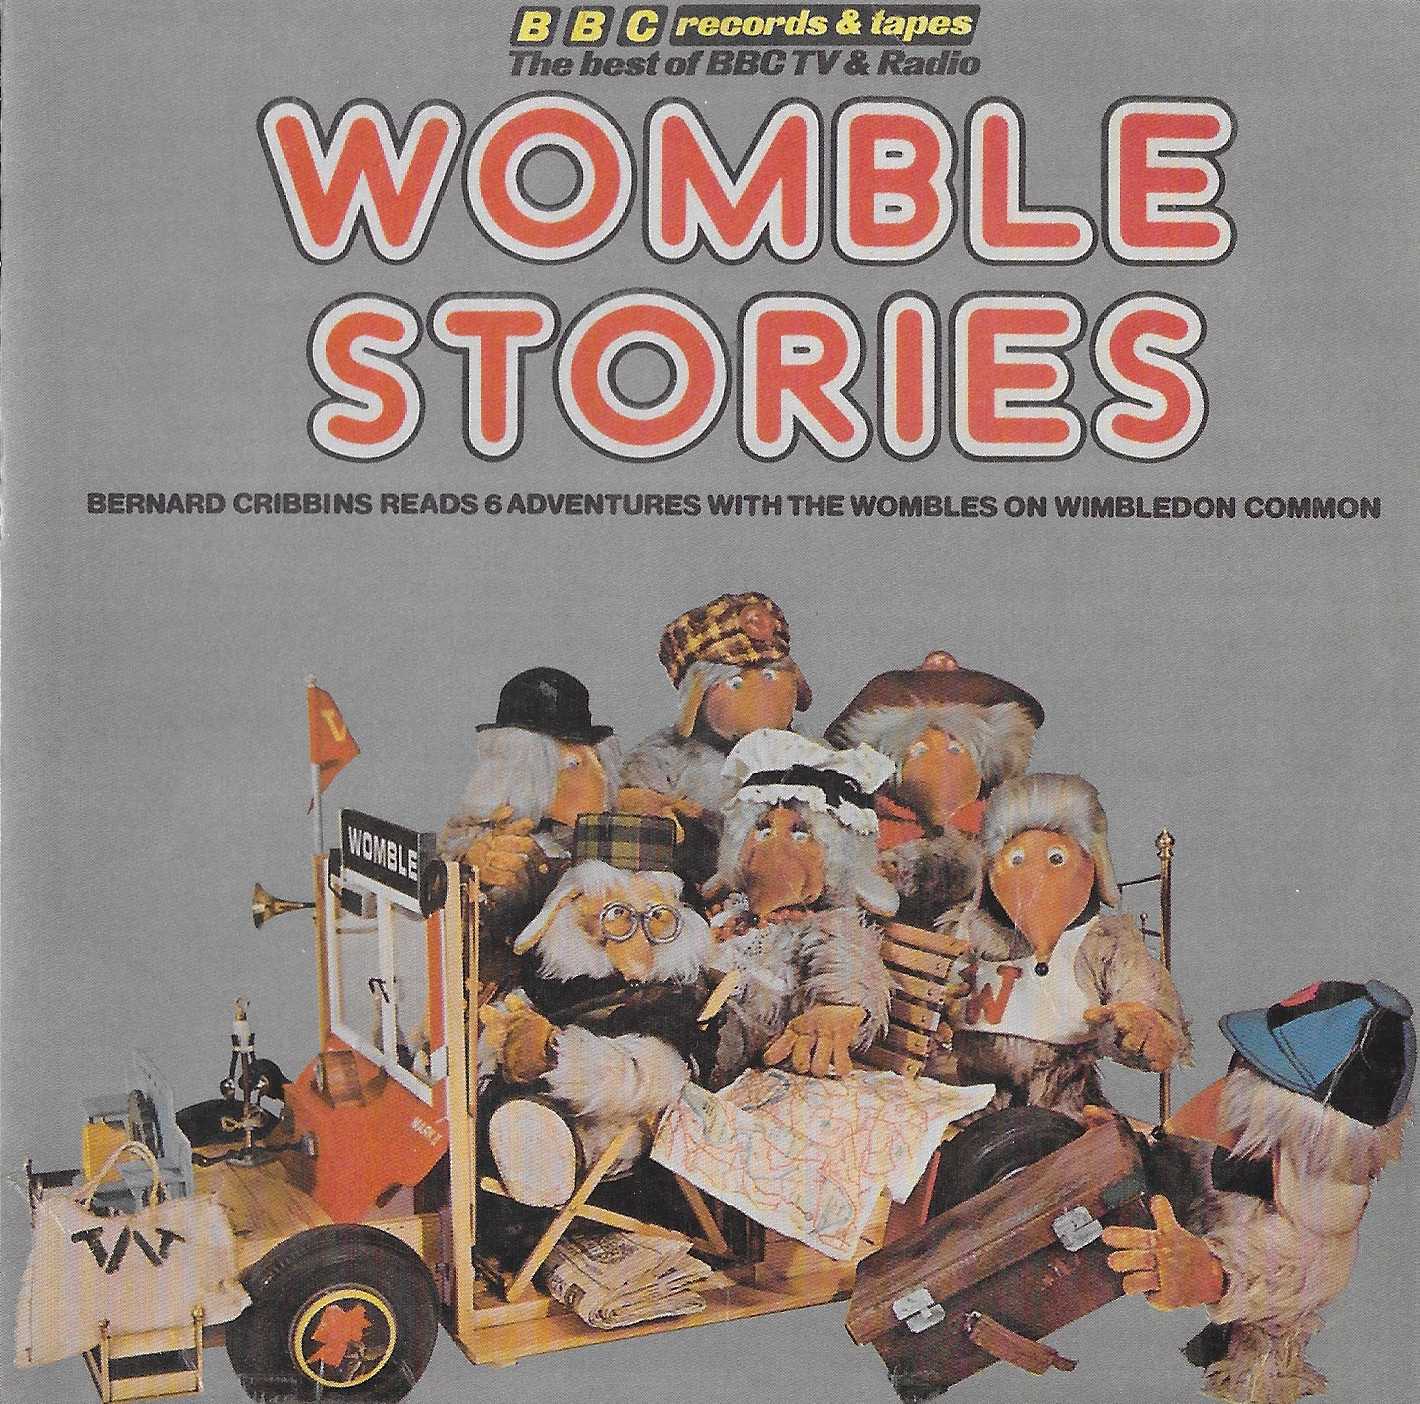 Picture of ISBN 978-1-4084-6810-0 Womble stories by artist Bernard Cribbins from the BBC cds - Records and Tapes library